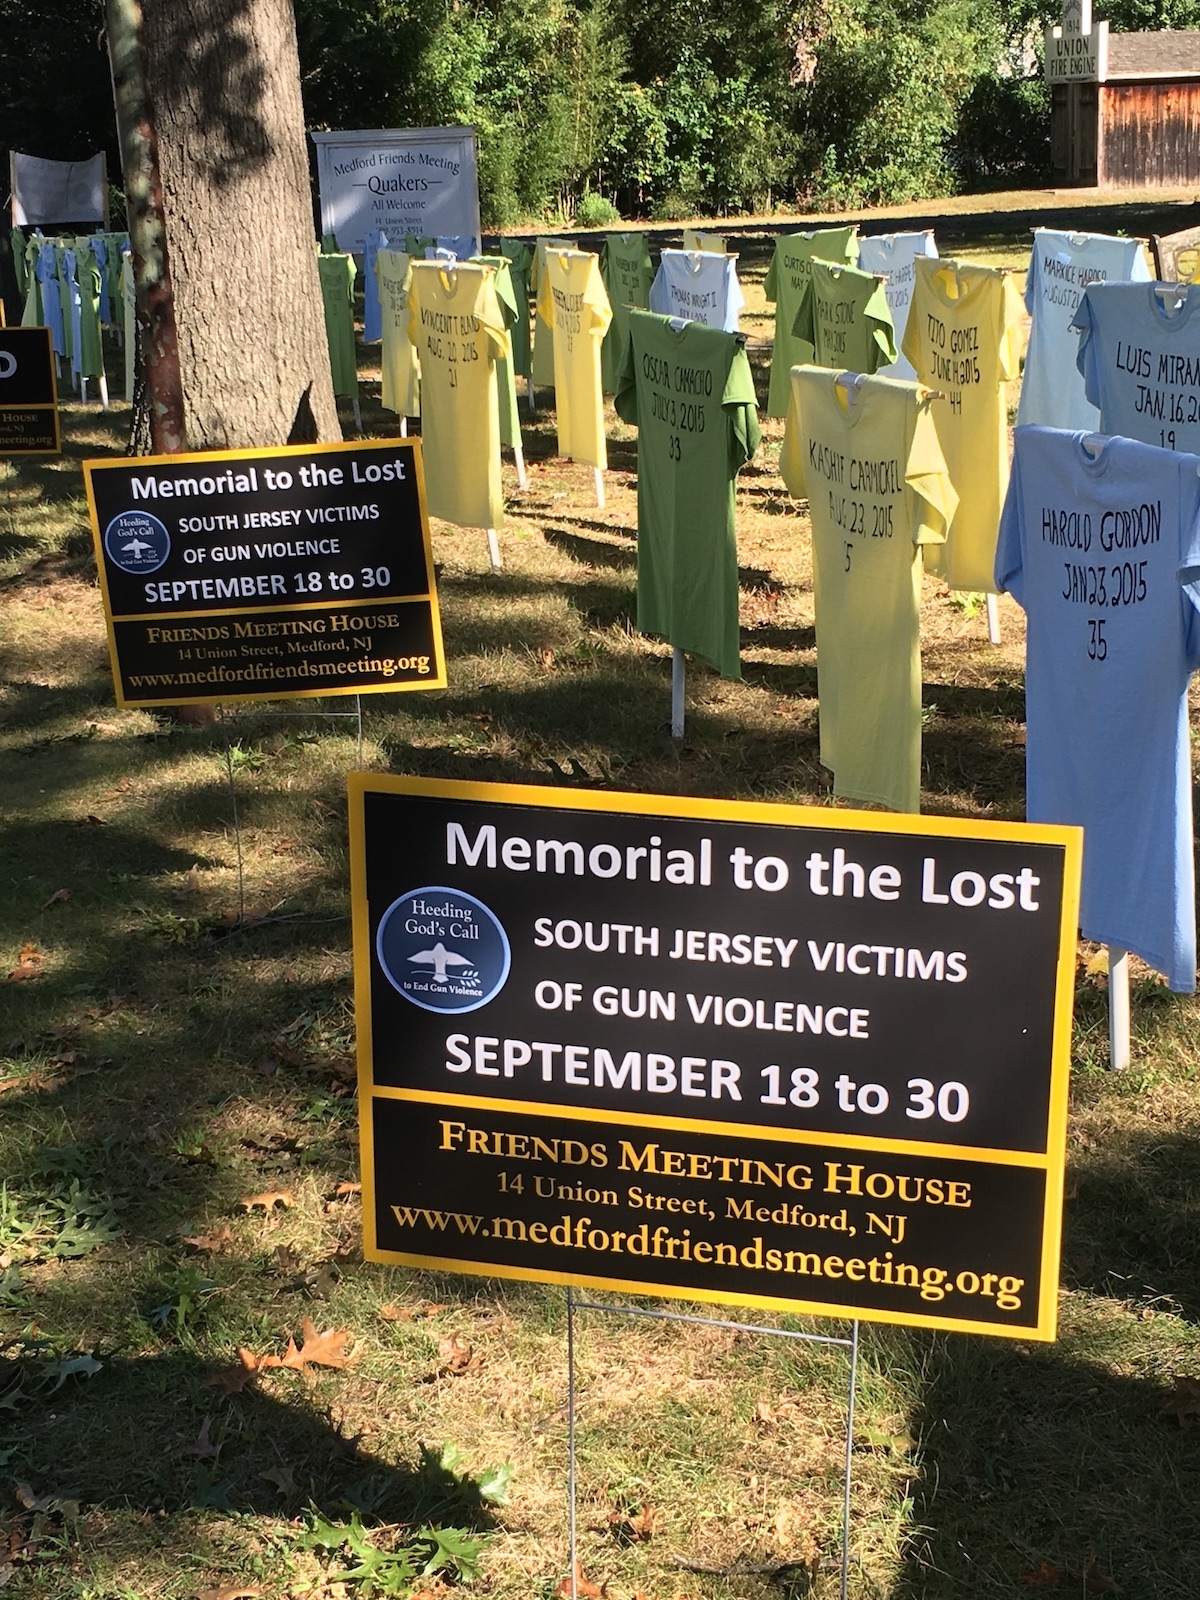 t-shirts stand up in a field as a memorial to those lost to gun violence